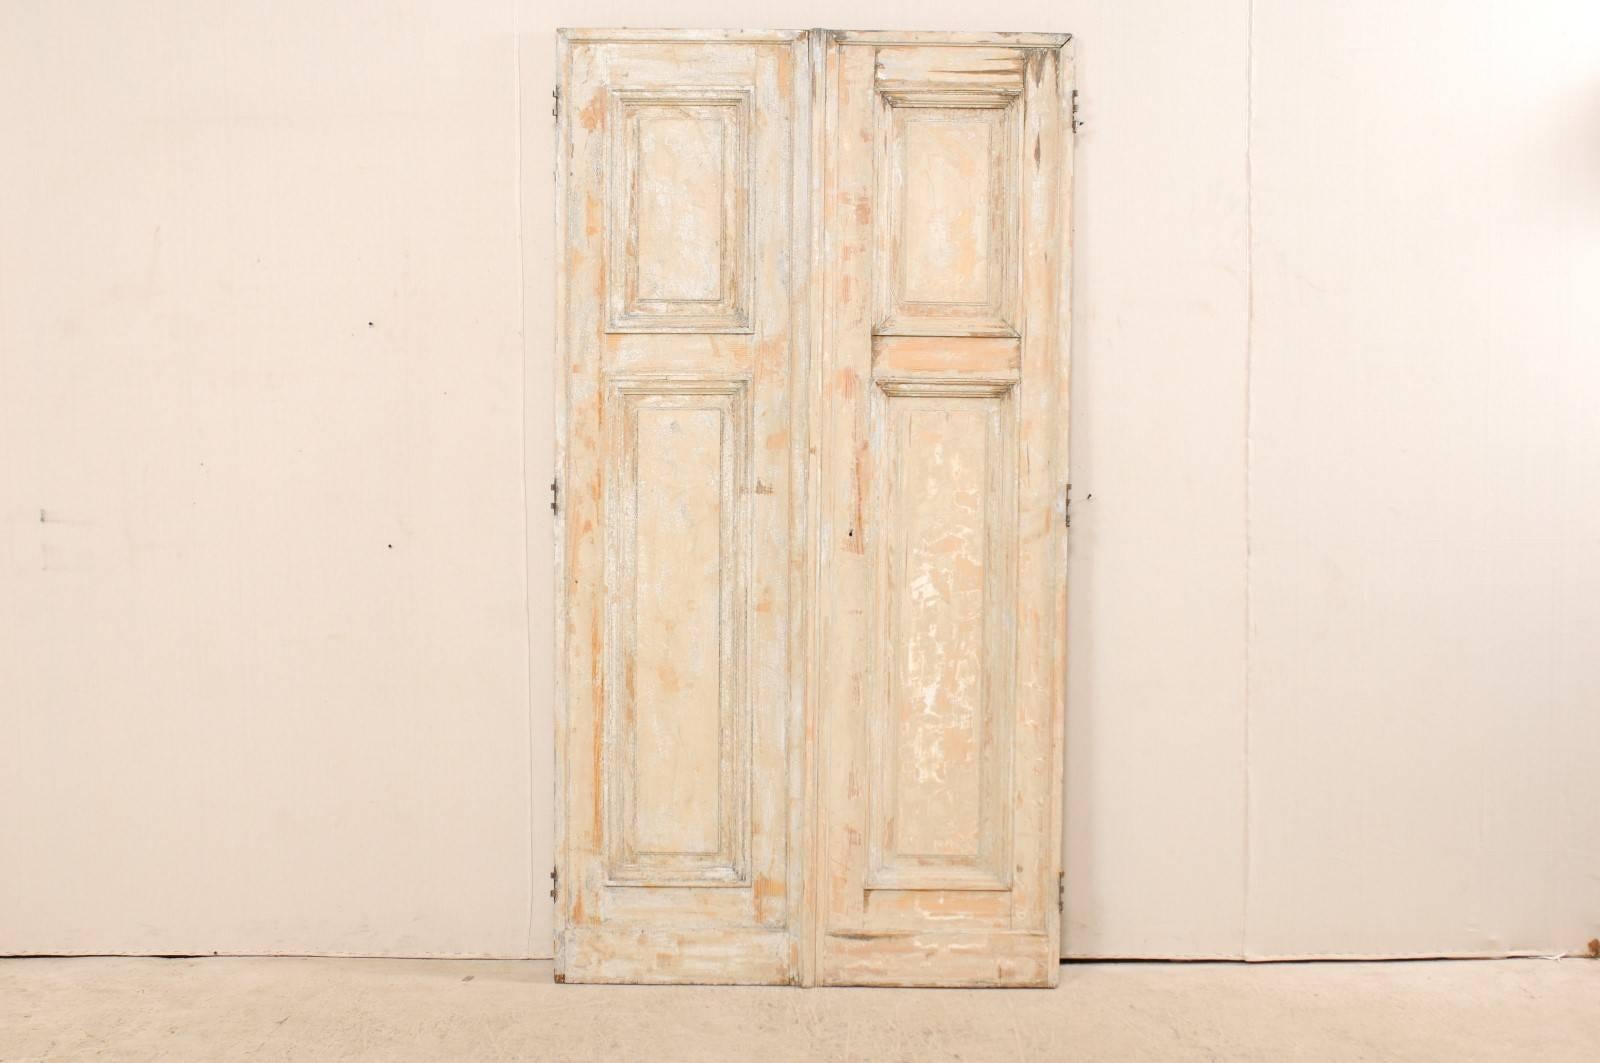 A pair of 19th century French doors. This pair of French doors each feature two recessed panels, with a shorter vertical rectangular-shaped panel at the top over a longer lower panel set into their front facing sides. These doors have a scraped